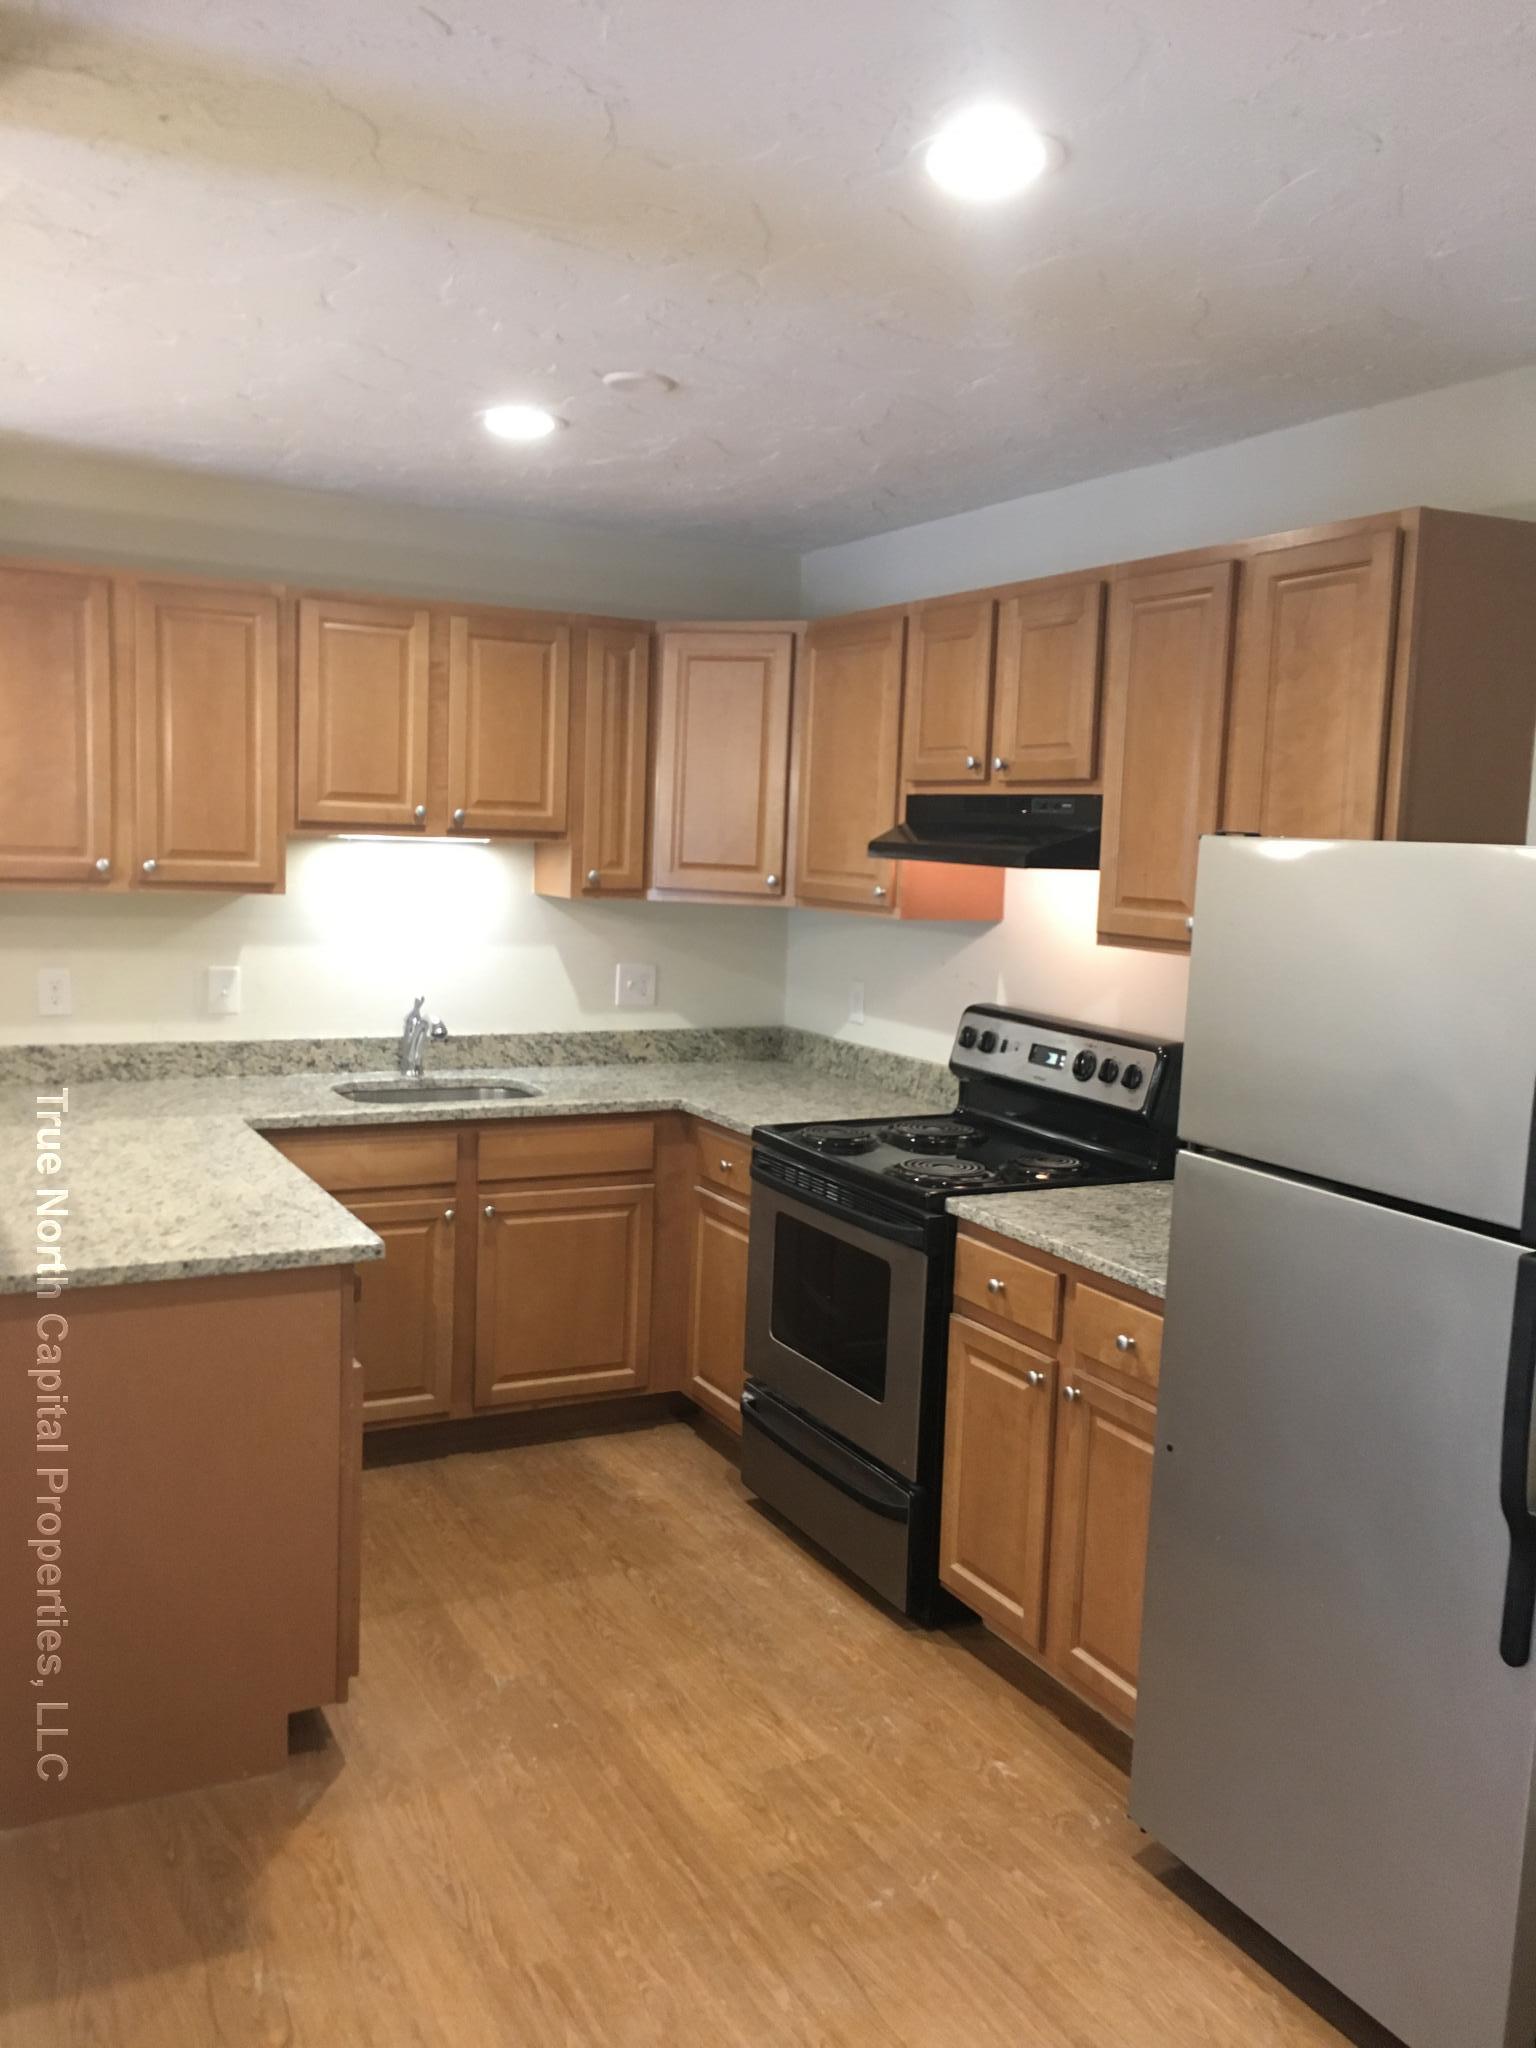 Photos of apartment on Dolores Ave.,Waltham MA 02452